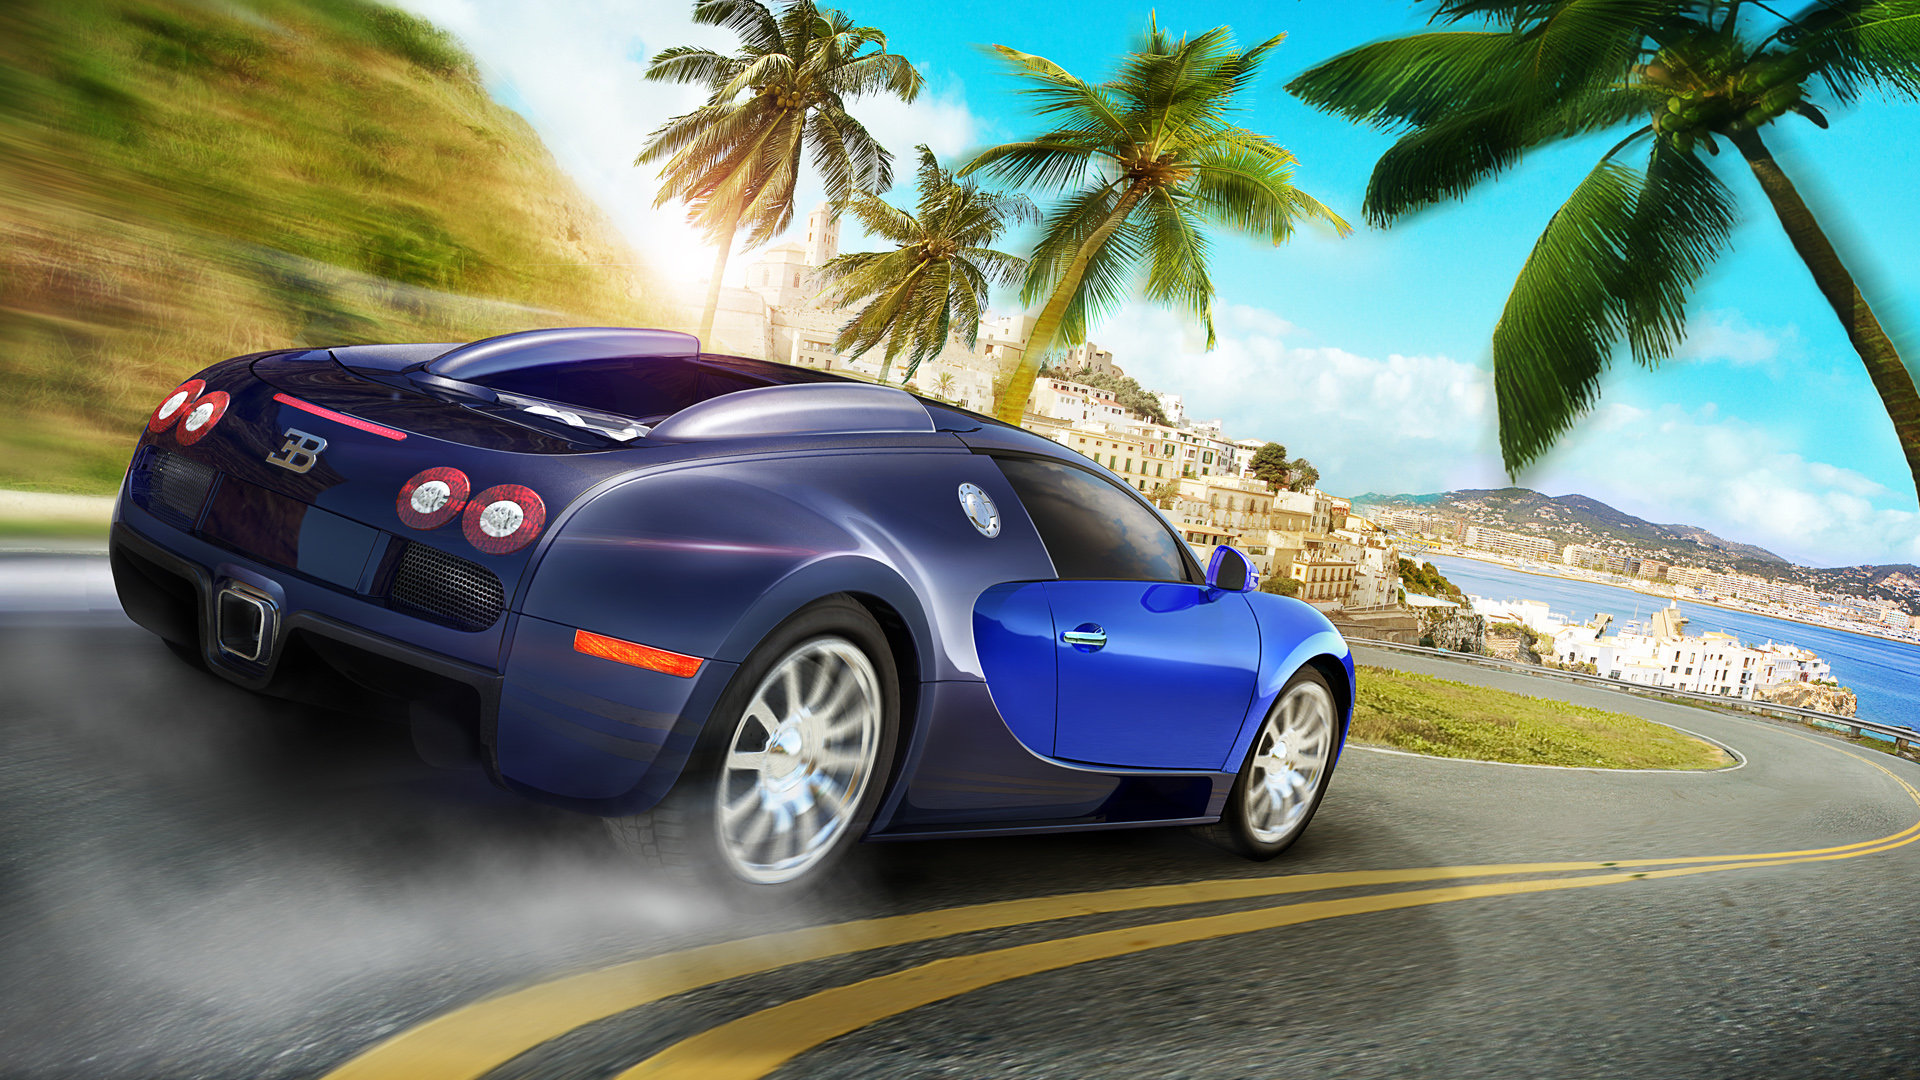 test drive unlimited 2 free